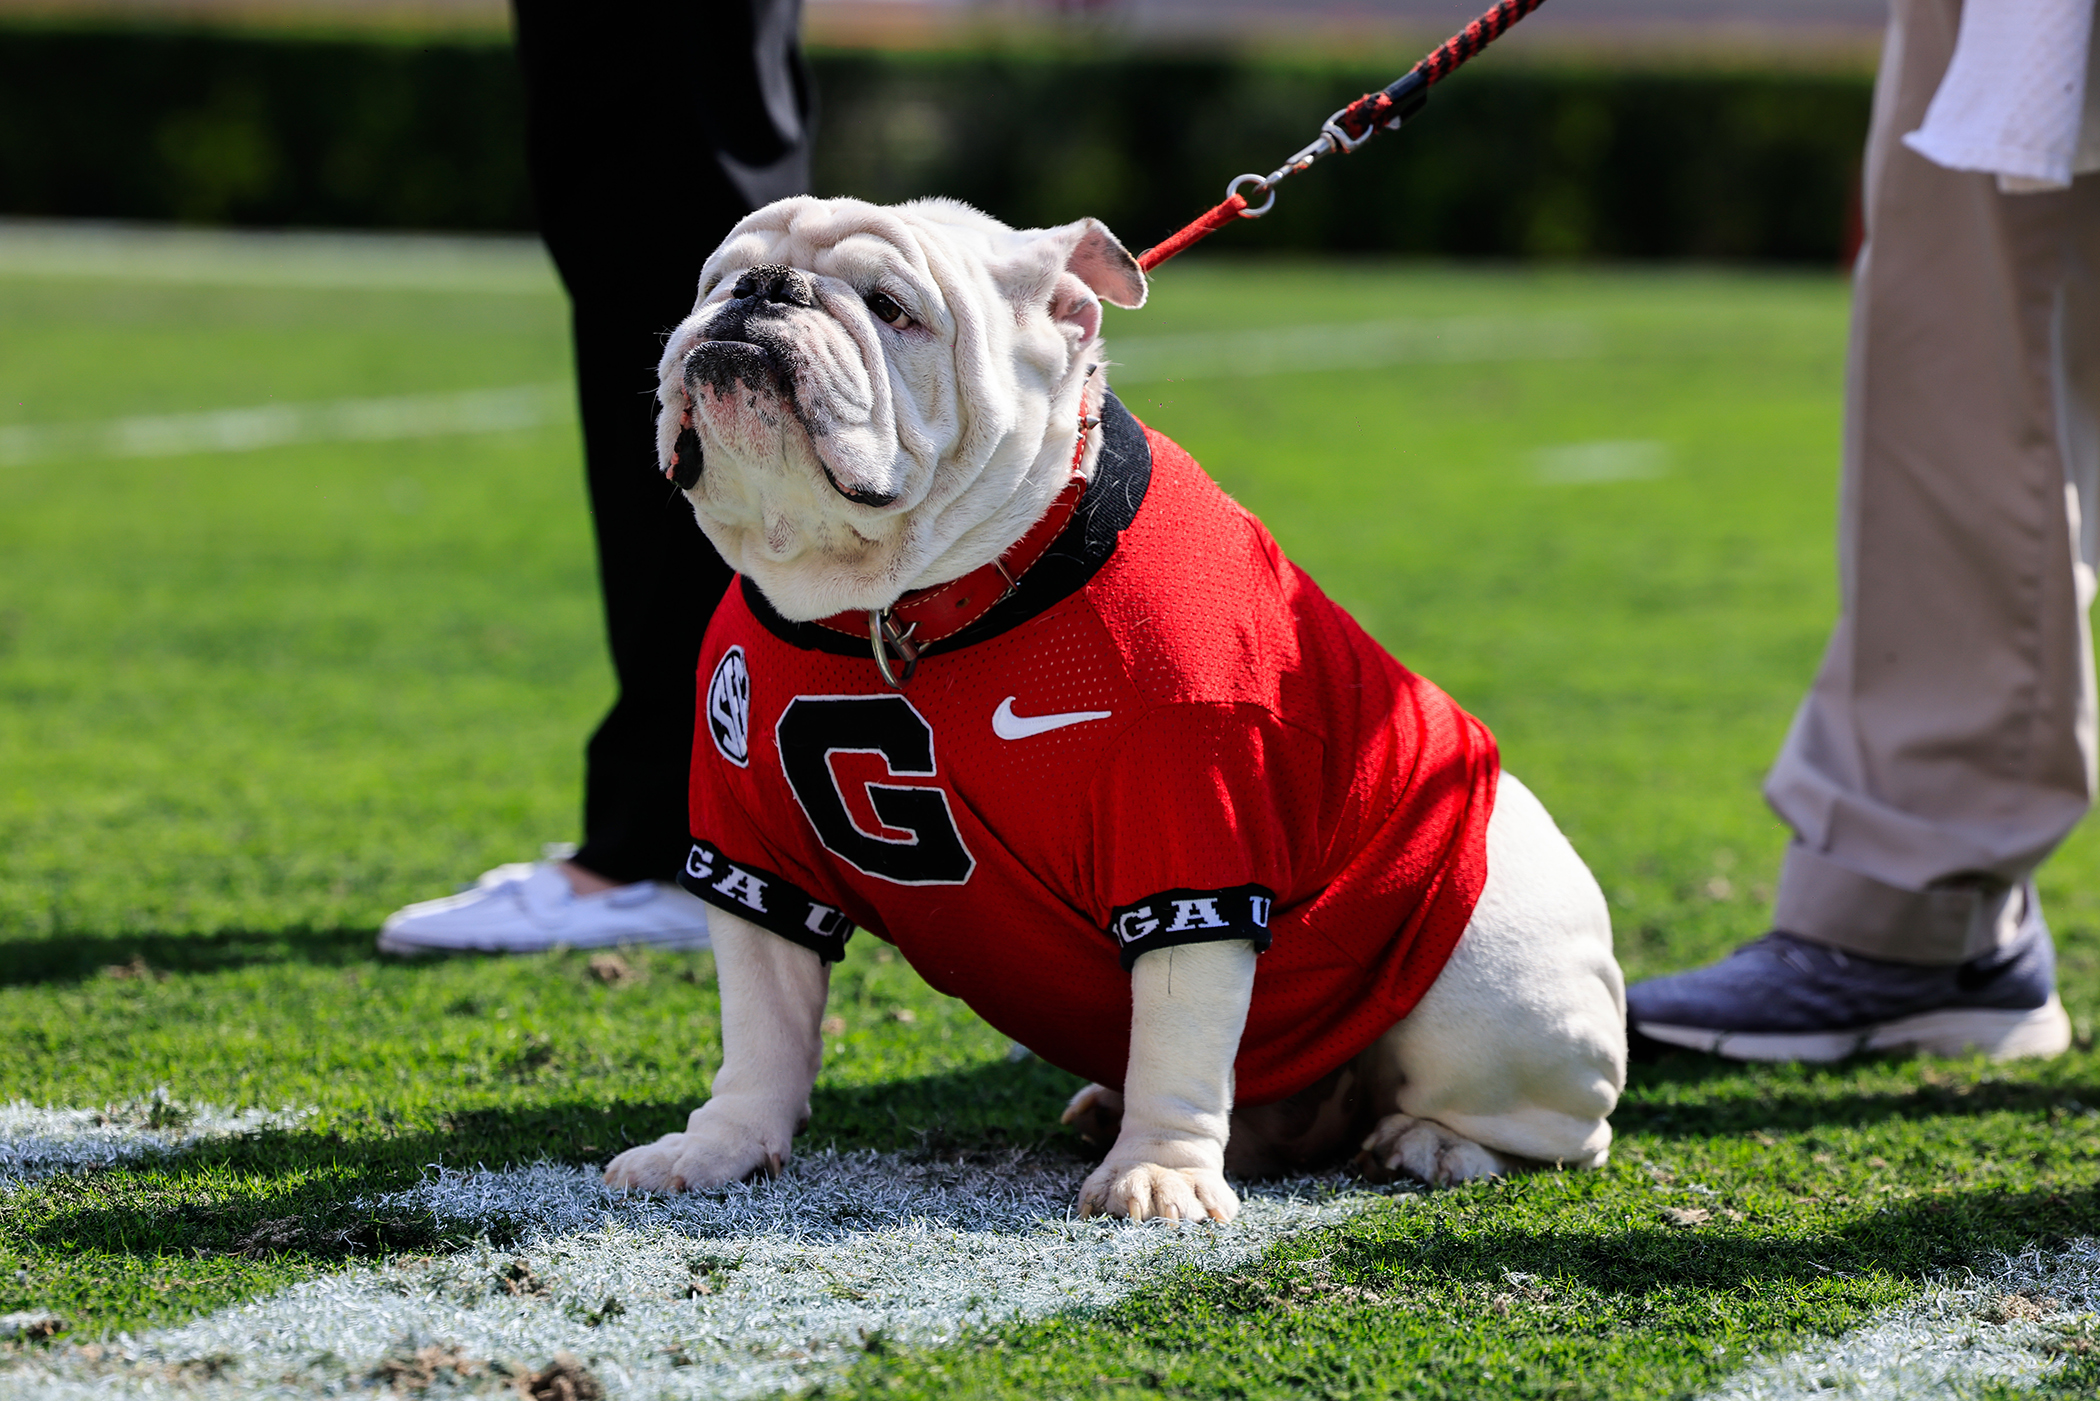 G-Day: Red beats black, Uga XI gets collared